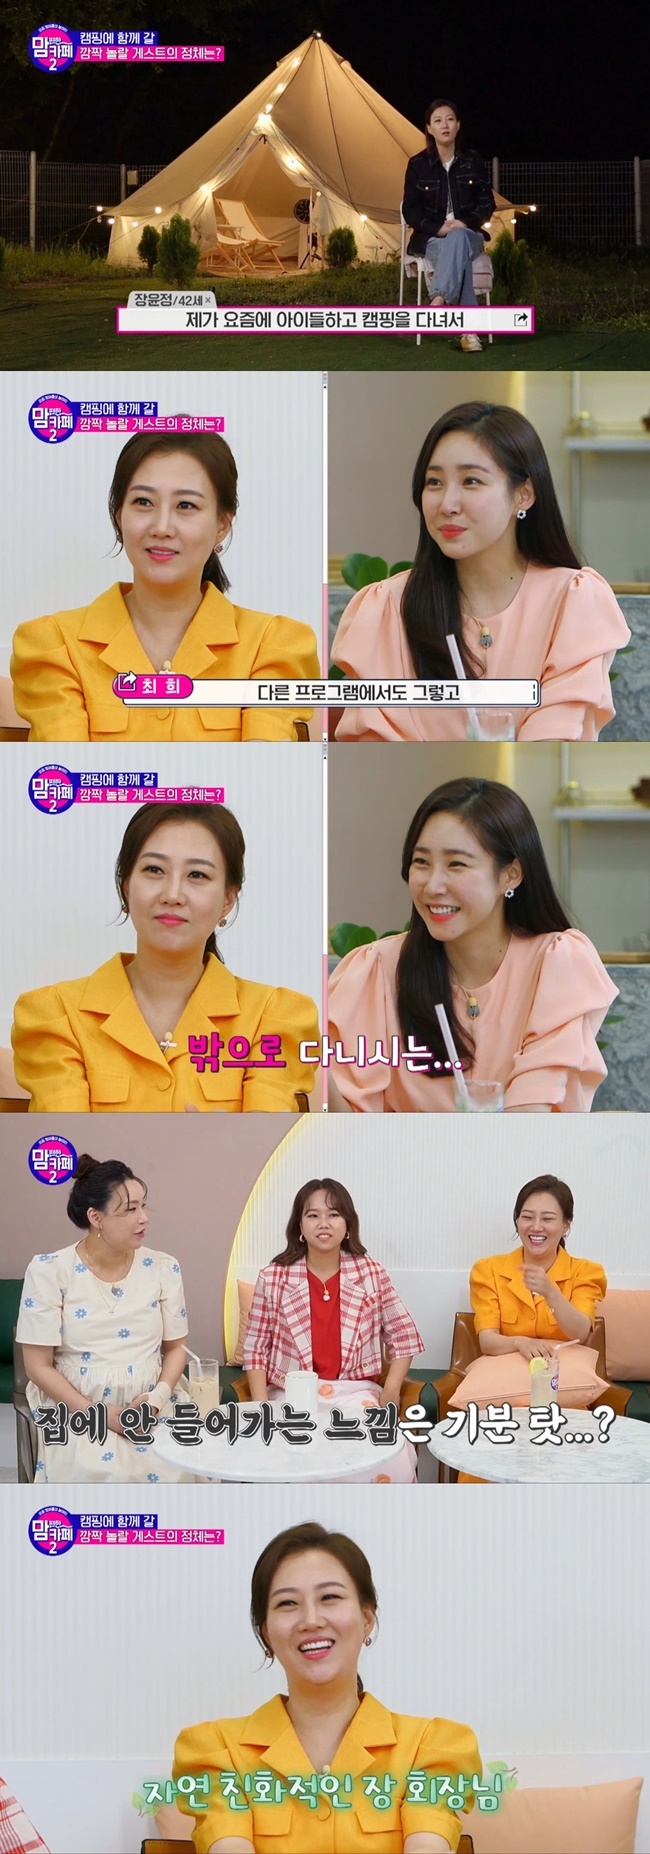 Broadcaster Choi Hee gave a laugh to Jang Yun-jeong by blowing fact violence.Jang Yun-jeong left Camping with chef Lee Yeon-bok on the teacast E channel Mam-comfortable Cafe 2 (hereinafter referred to as Mam Cafe 2), which aired on June 21.I go camping with my kids these days, not just obvious when I went to Camping, but I wanted to learn fresh dishes and asked for help, Jang Yun-jeong said.Choi Hee laughed, Yoon Jung Sister is like other programs and it seems like Dani Alves is out these days, and Jang Yun-jeong laughed.